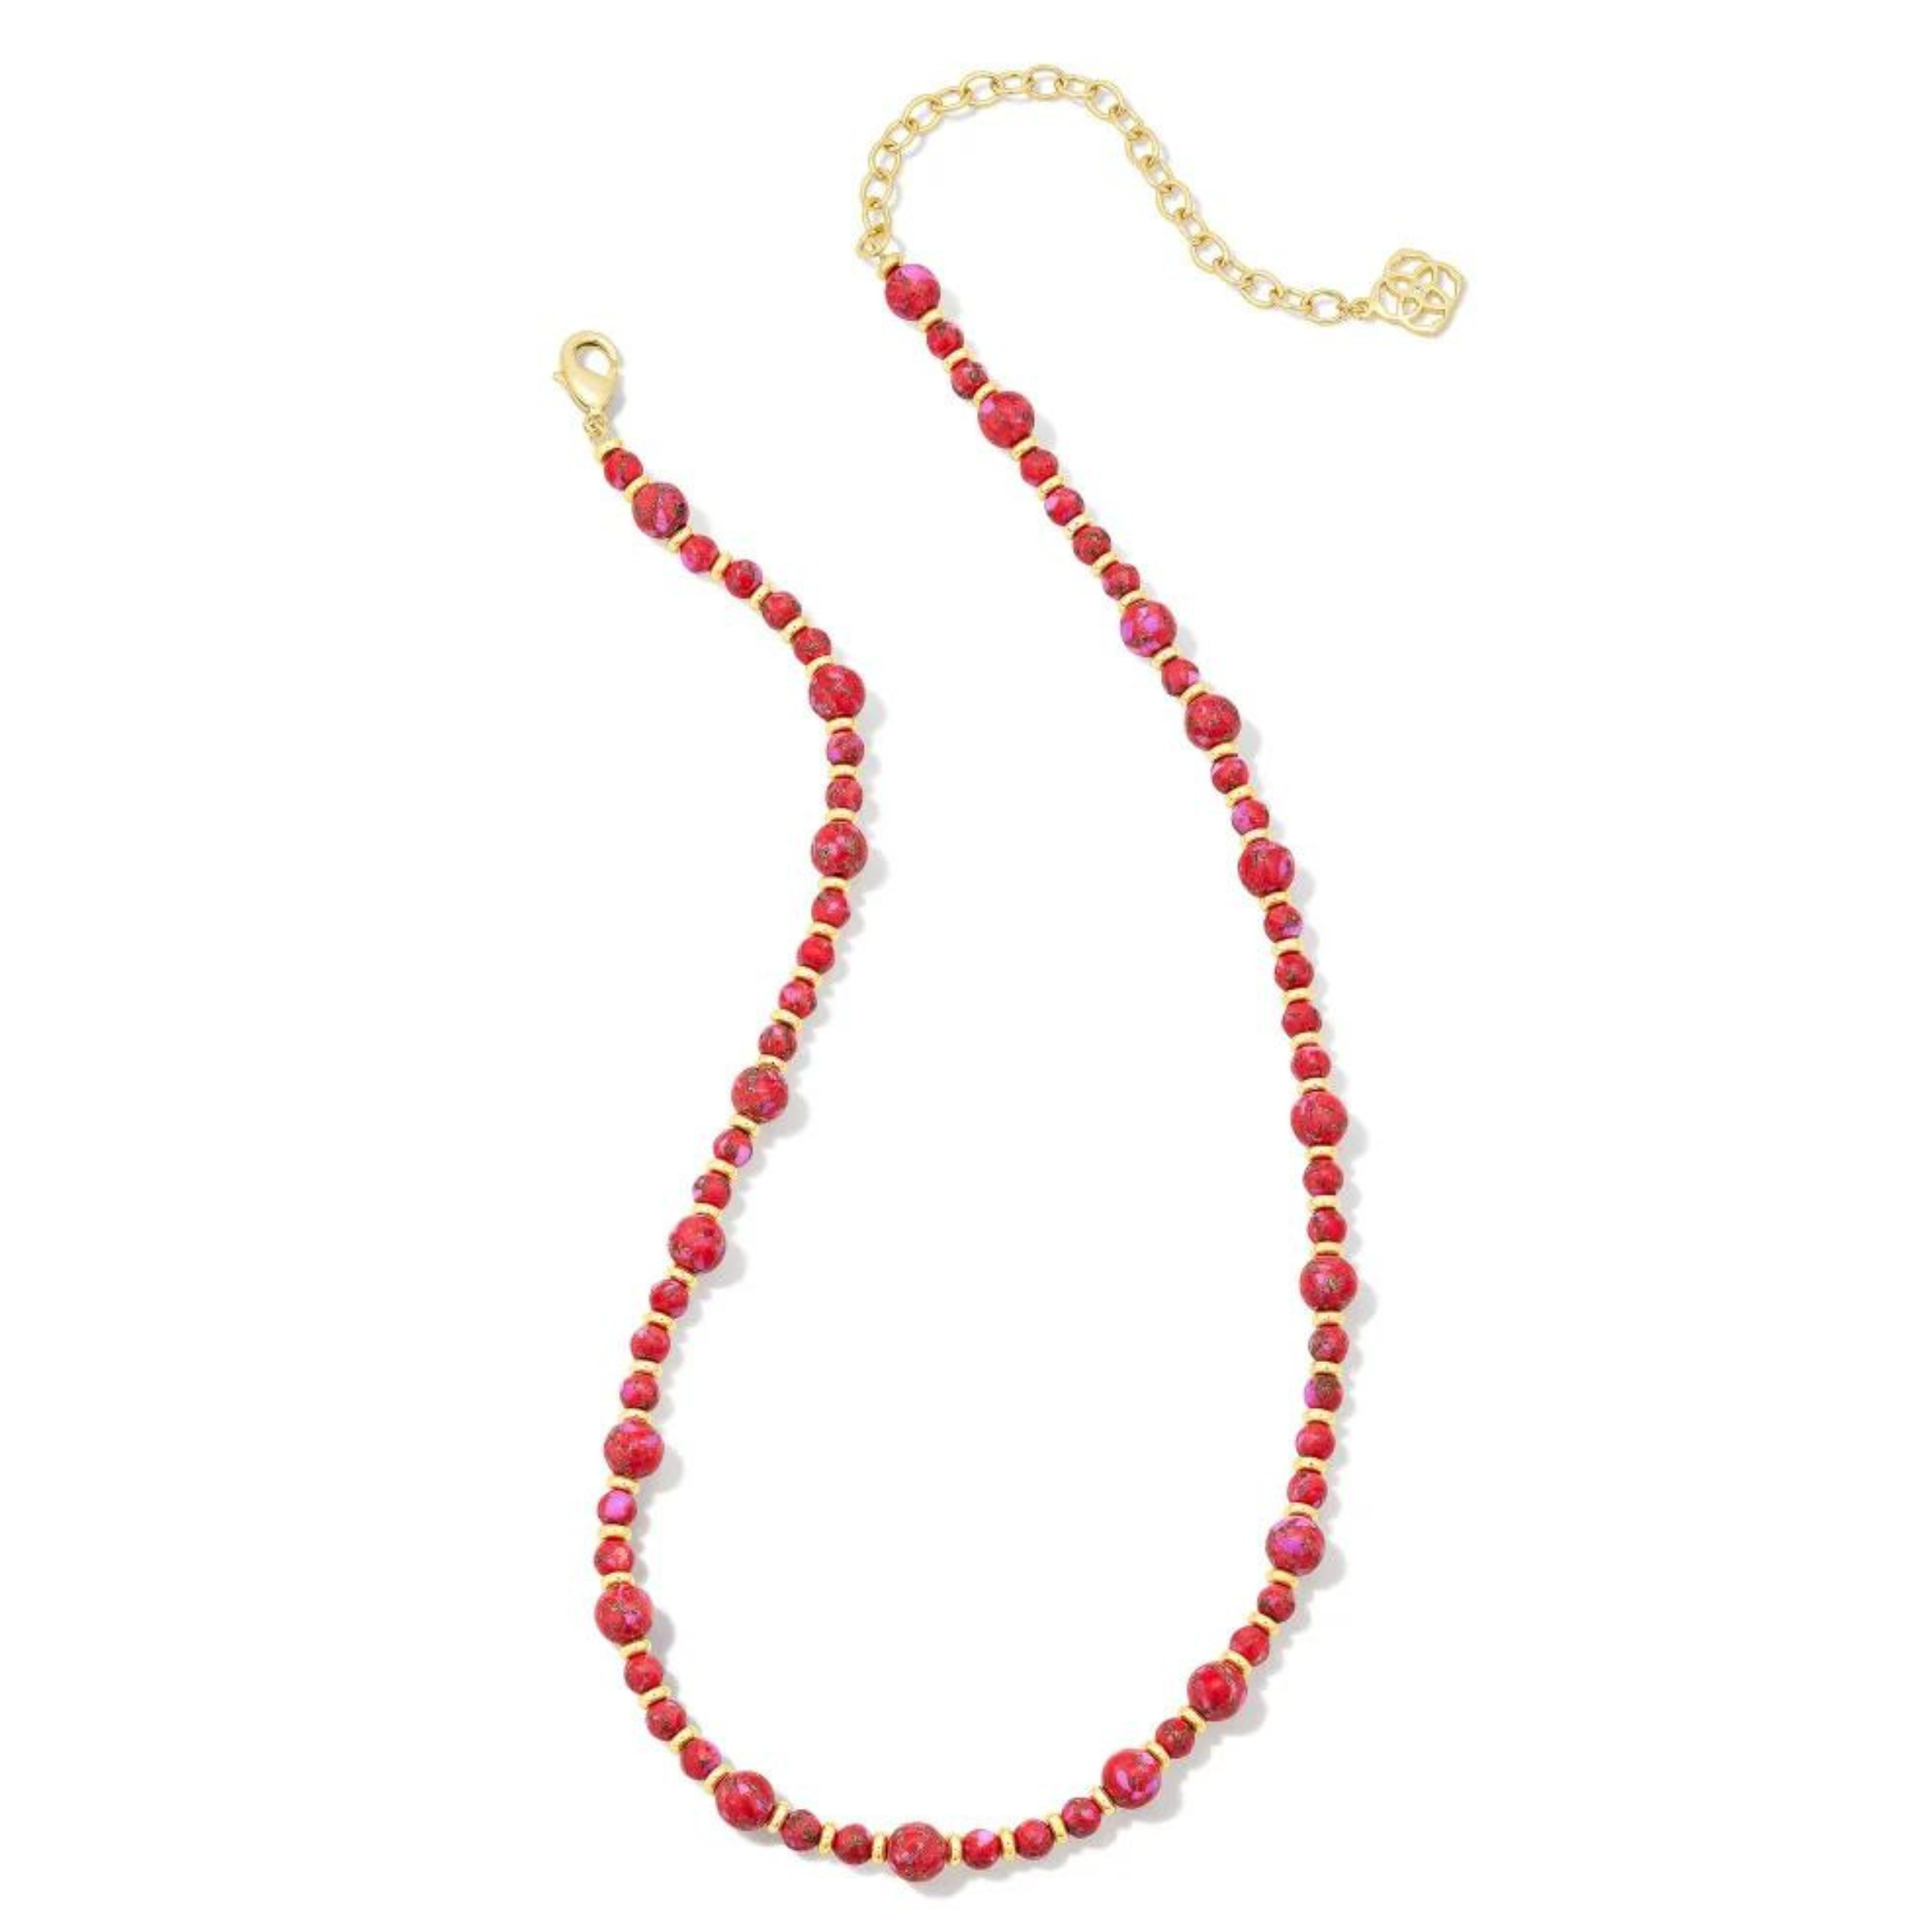 Gold spacers and varying size red marble beaded necklace. This necklace is pictured on a white background. 